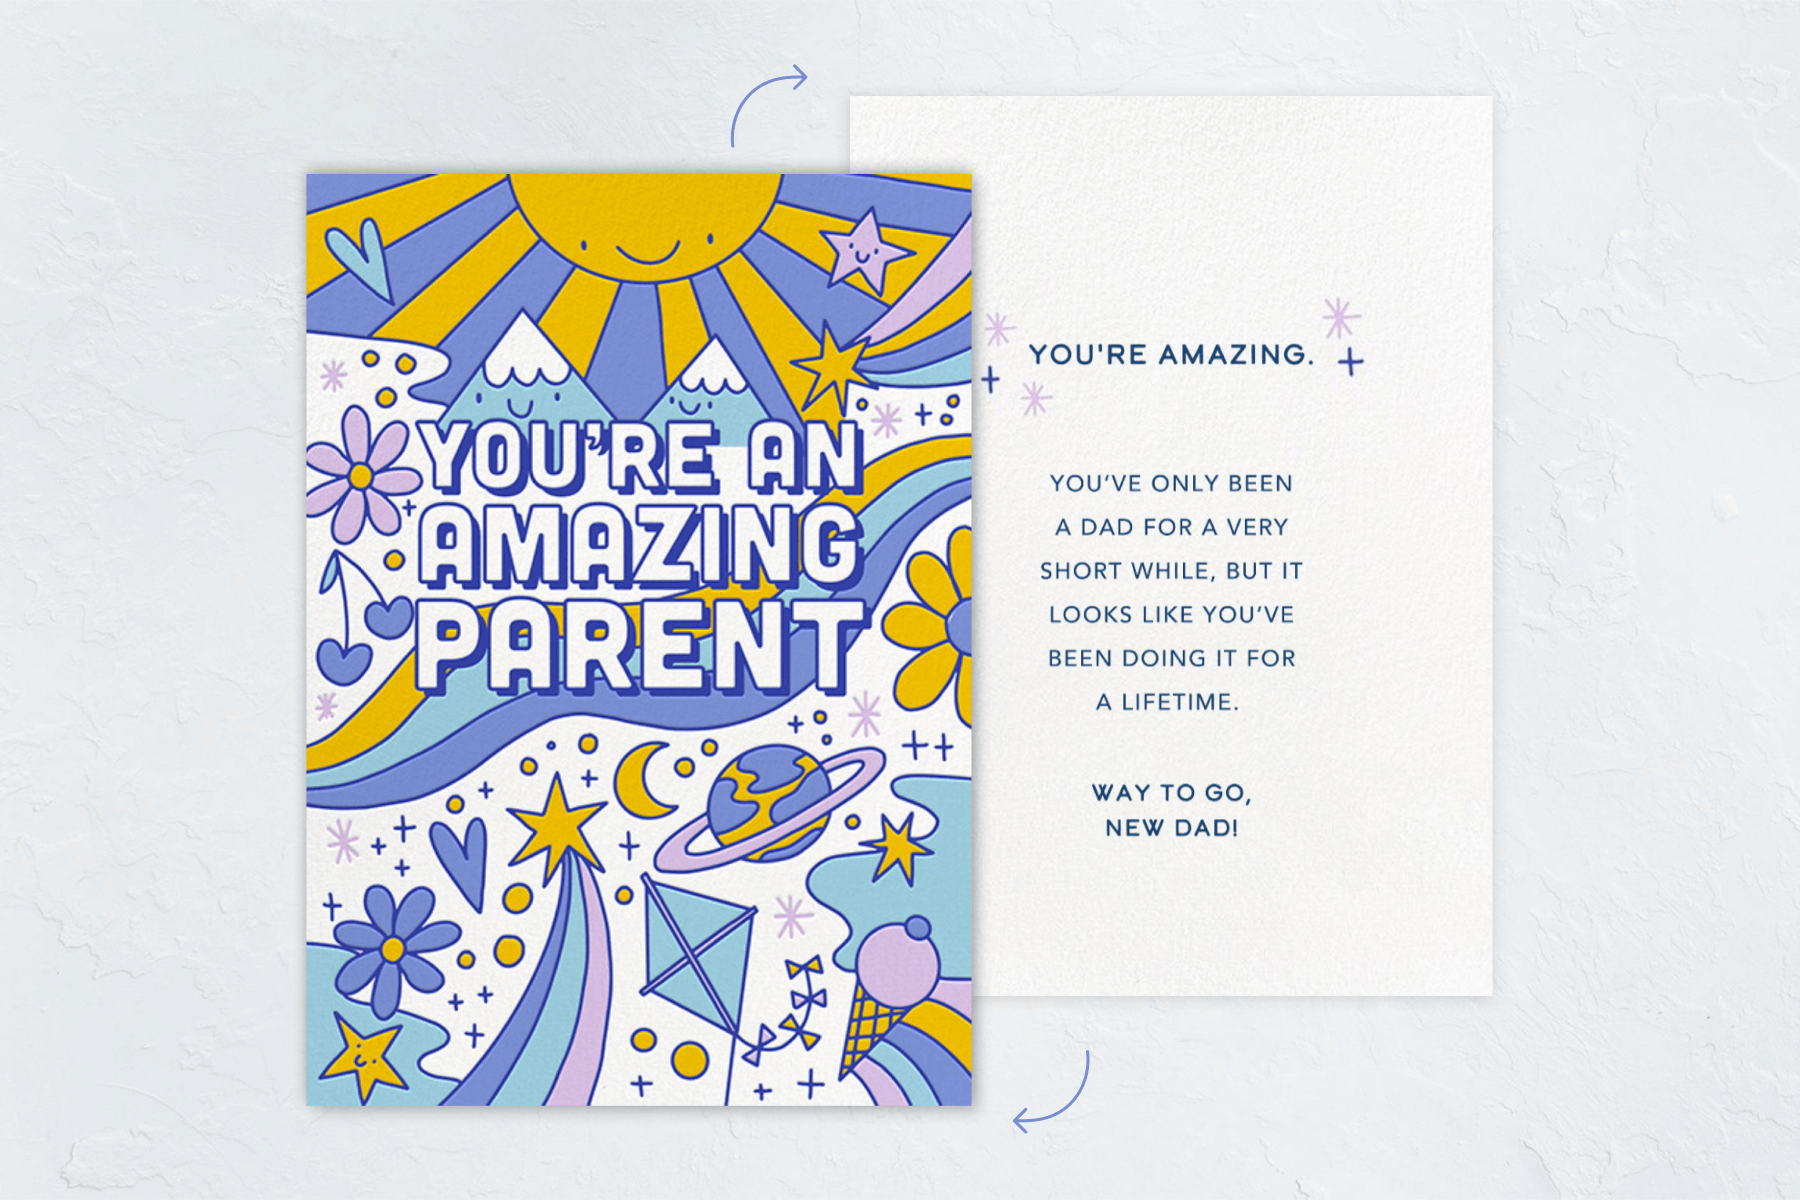 A Father’s Day card featuring an illustration of a sunny scene with lots of stars, moons, flowers, and mountains, along with the phrase “You’re an amazing parent.” The back of the card is also shown with a sample message also listed in the suggestions below.